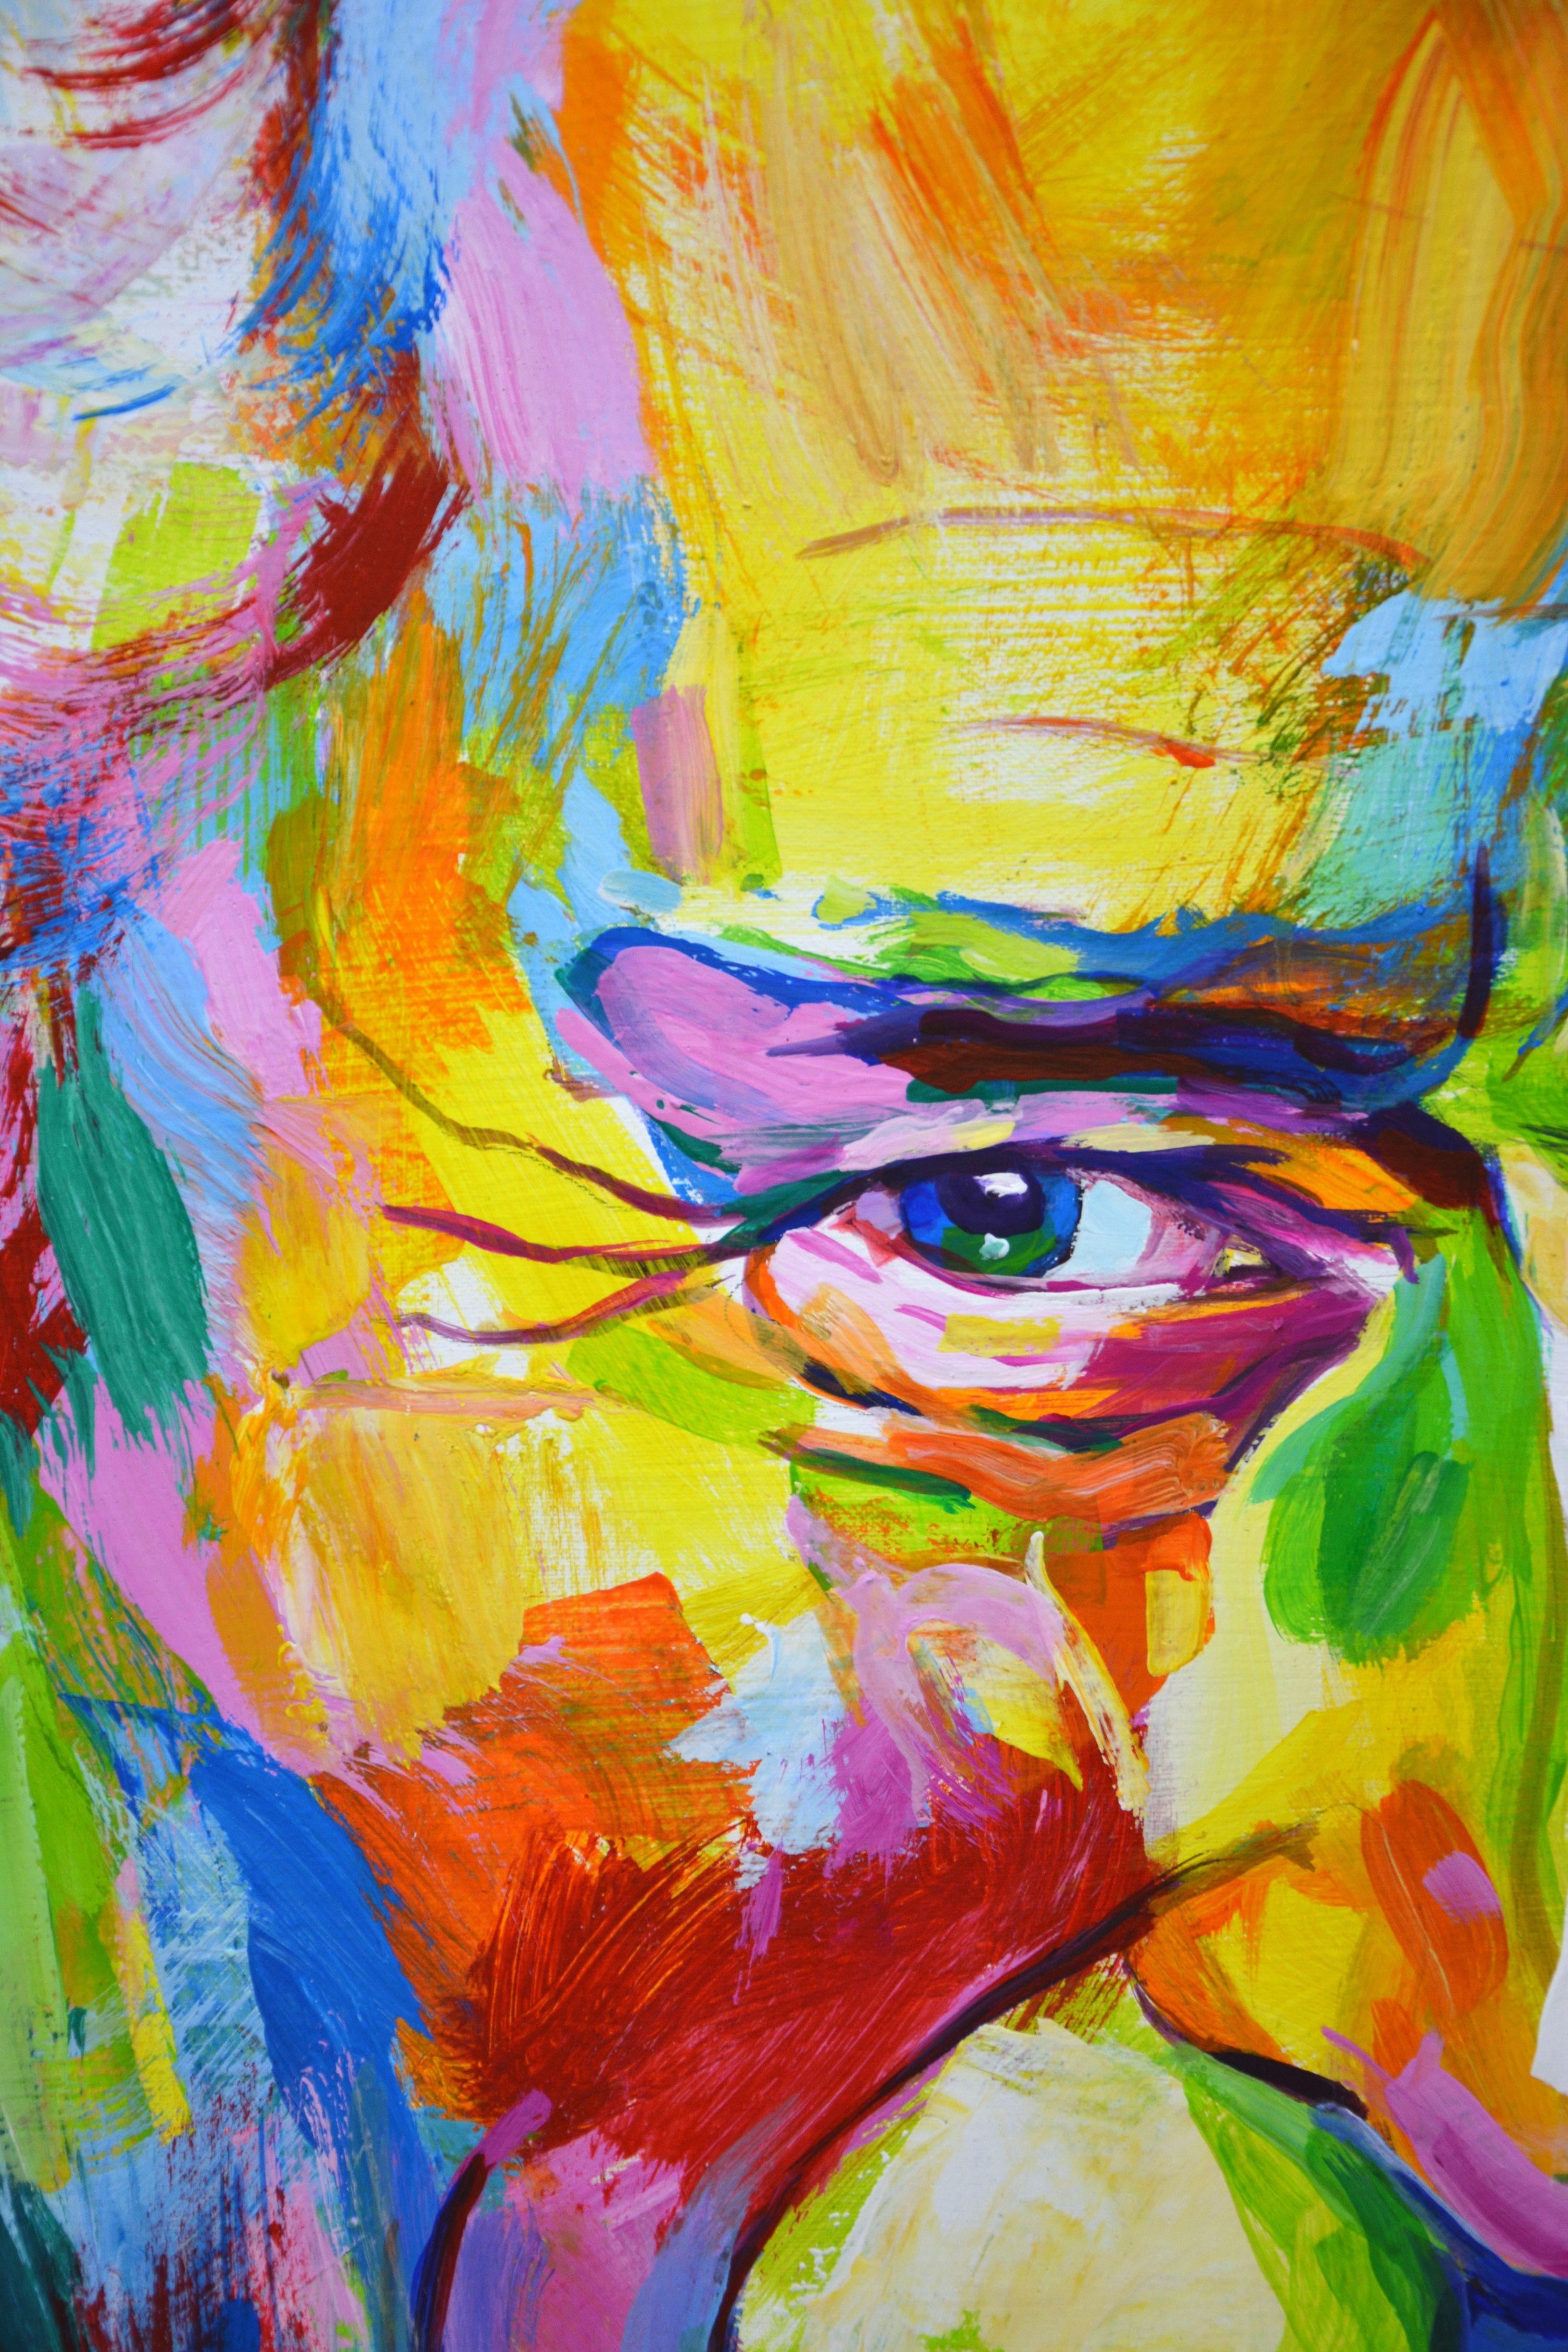 King Charles 3. Painted in a modern style with brushes and a palette knife. Pop Art. Expressionism. Realism. Used a bright palette of colors: yellow, green, pink, red. Quality materials. The picture is painted with acrylic on canvas, varnished. The